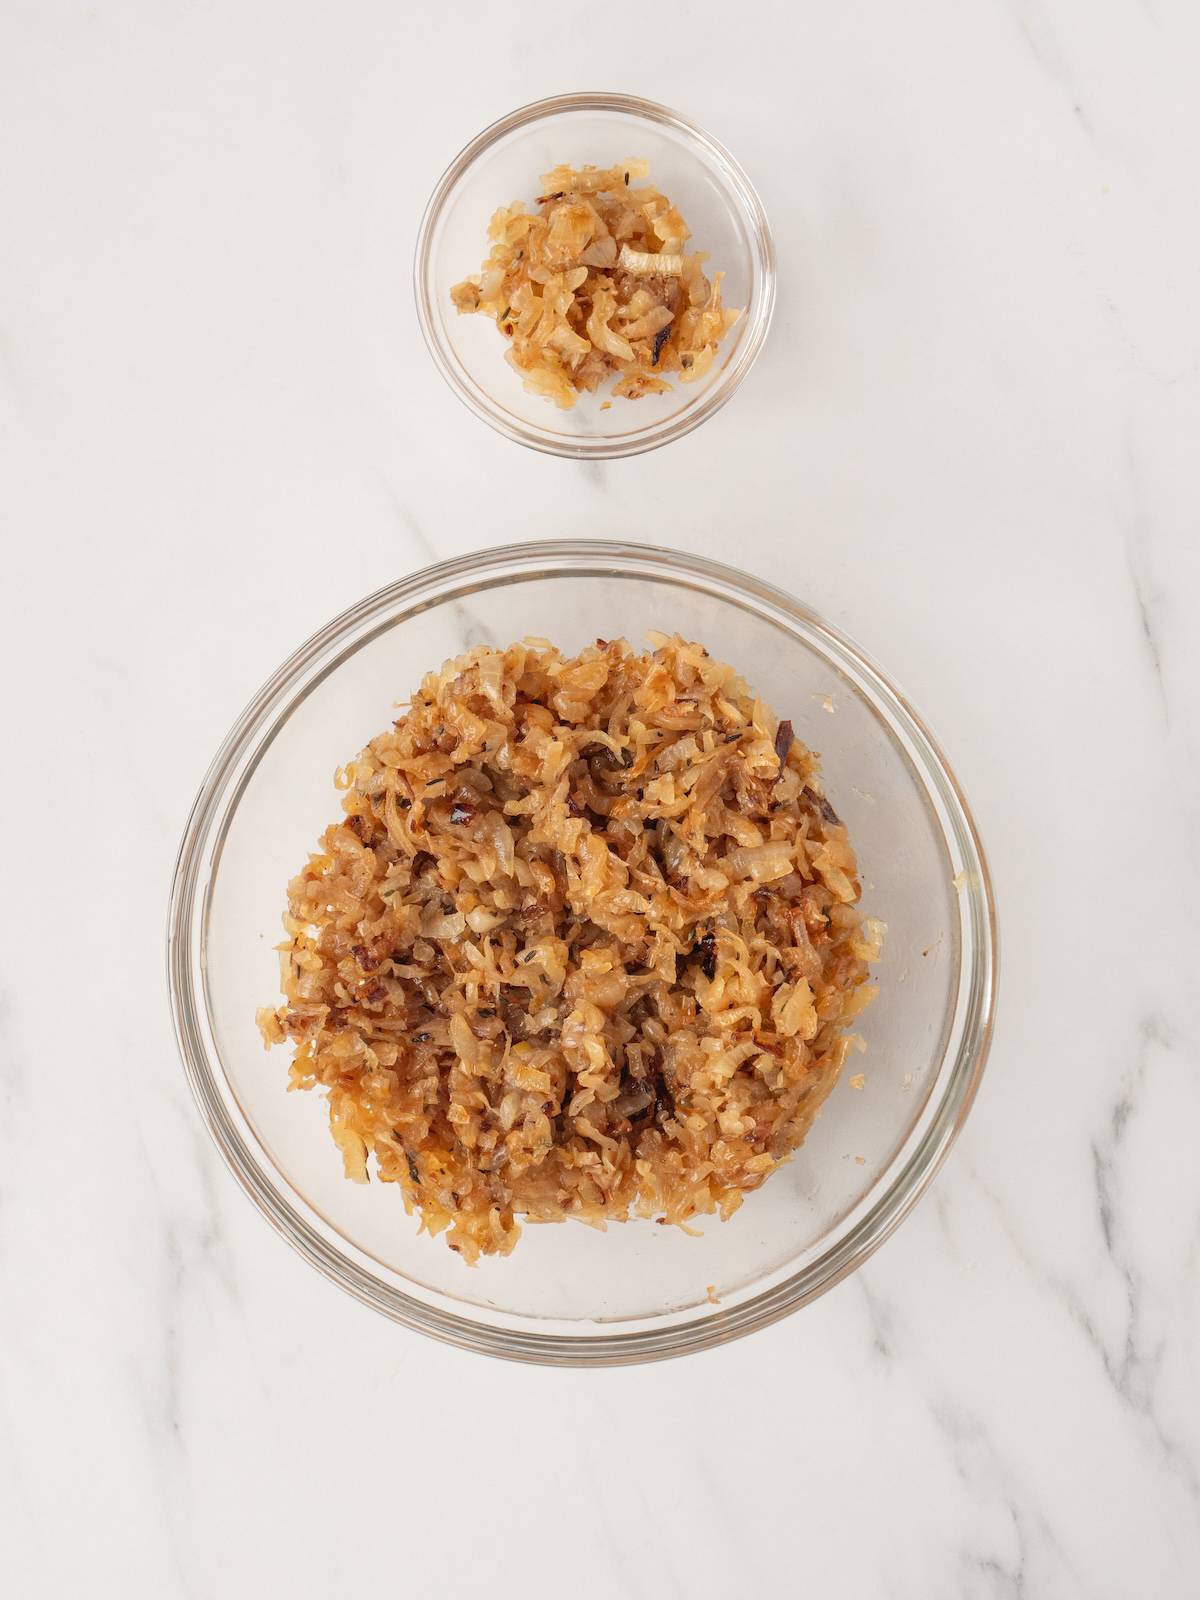 A large glass mixing bowl and a small glass mixing bowl of roasted onions and shallots.